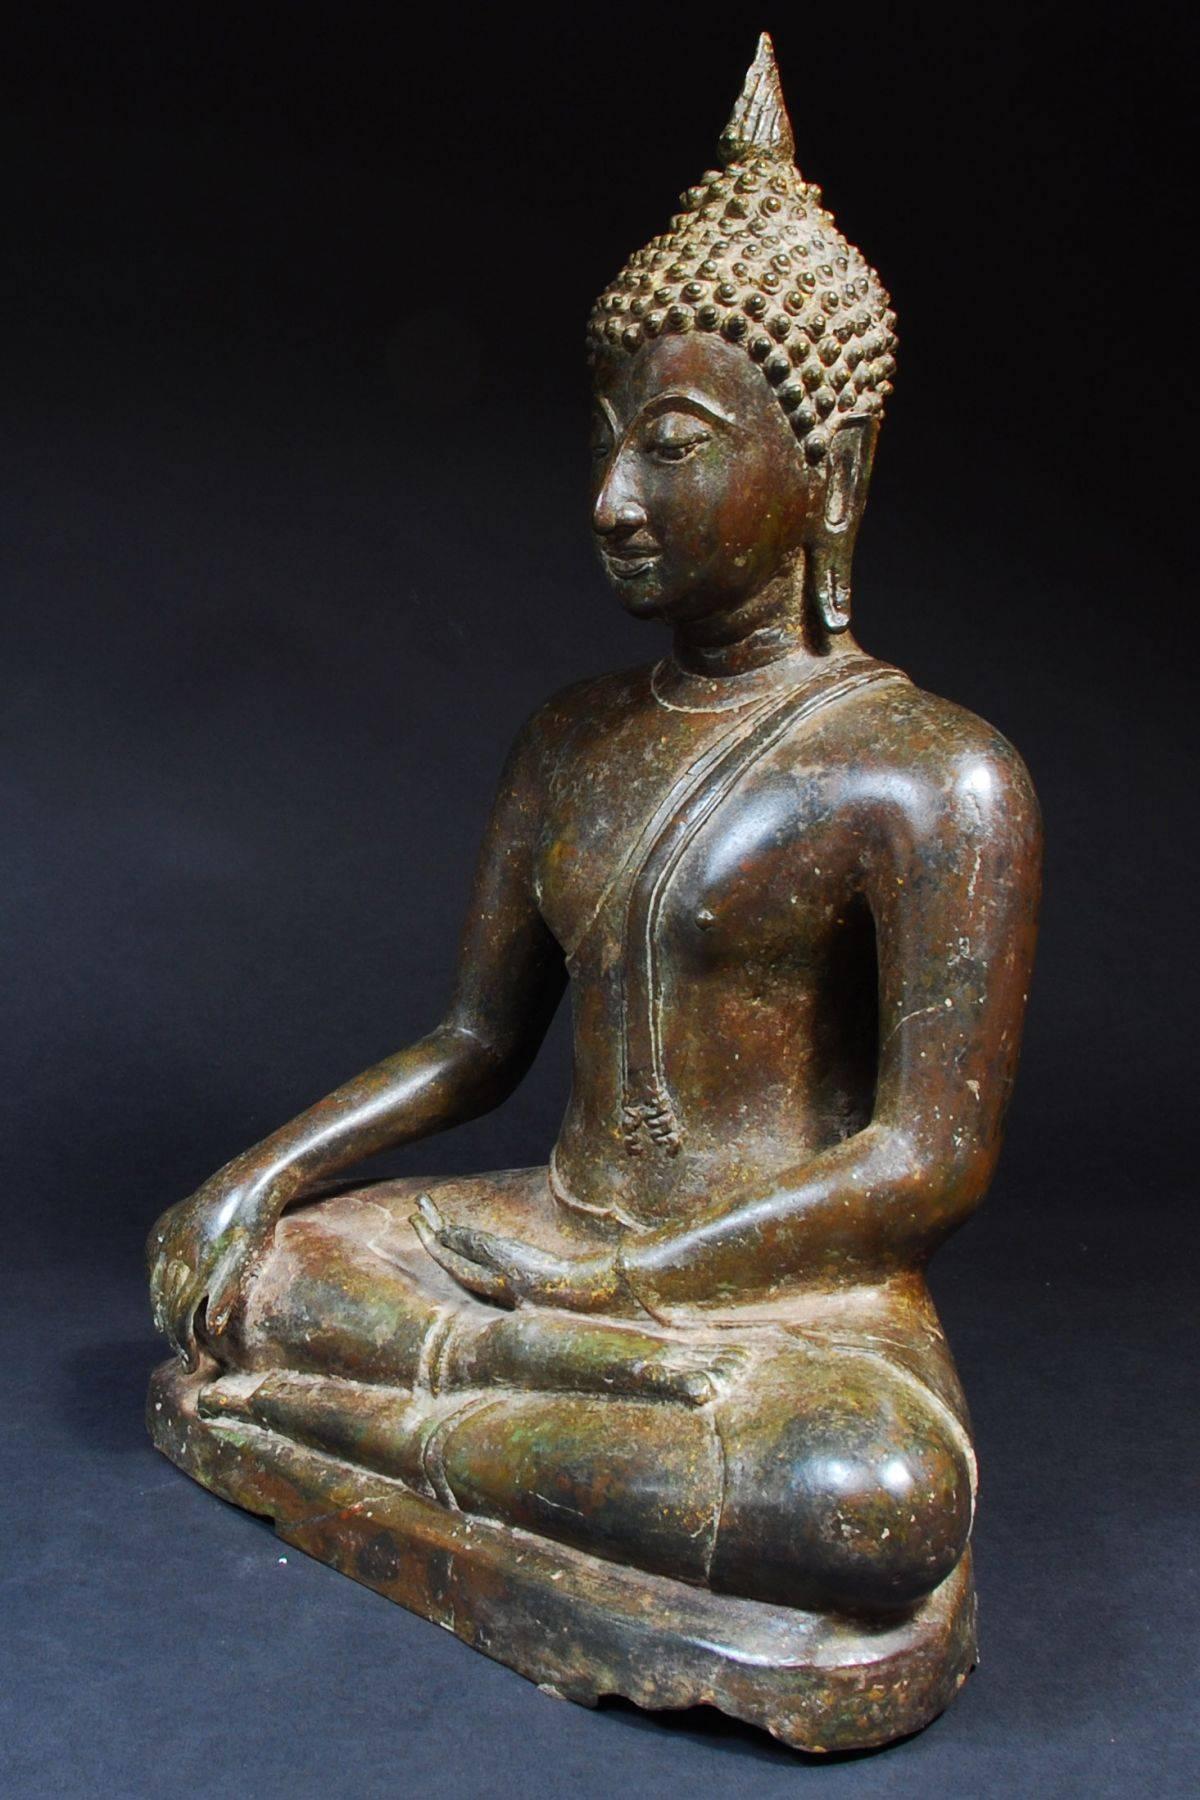 Offered by CALLIE MORGAN OAKES
18th Century Bronze Northern Sukhothai Style Buddha from Thailand
